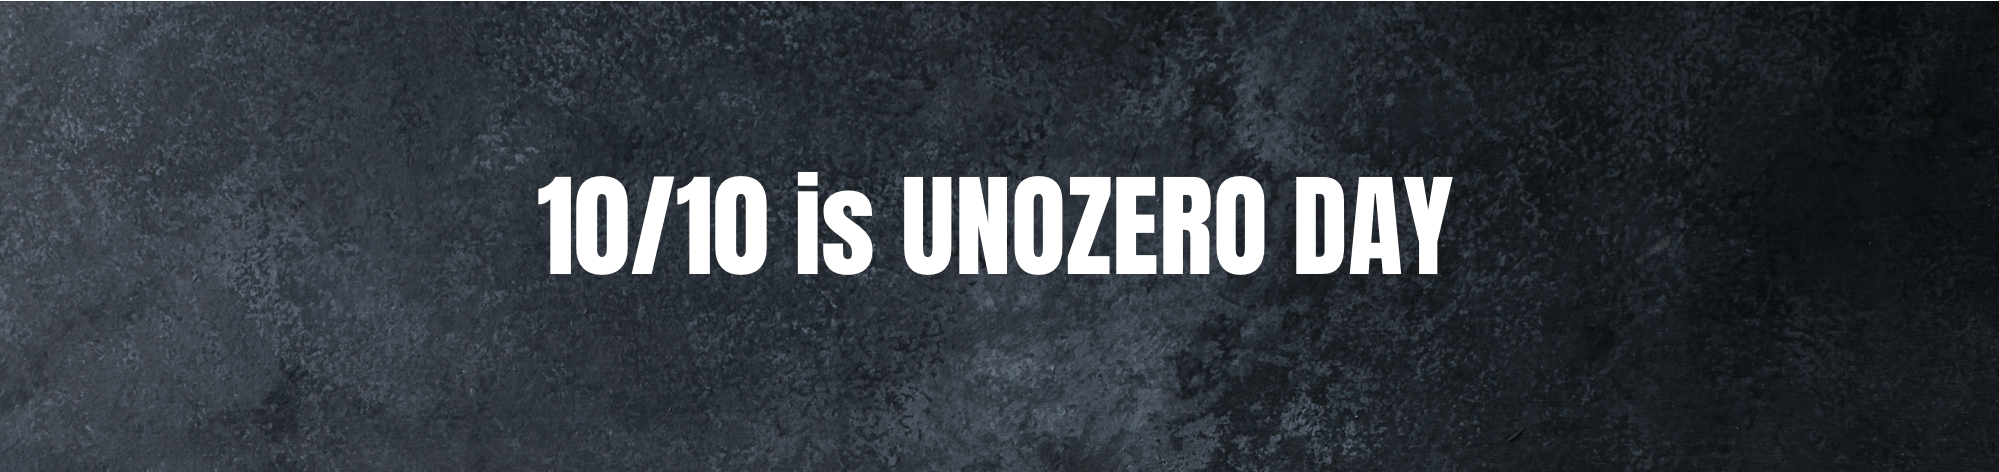 October 10th marks our second ever UNOZERO DAY